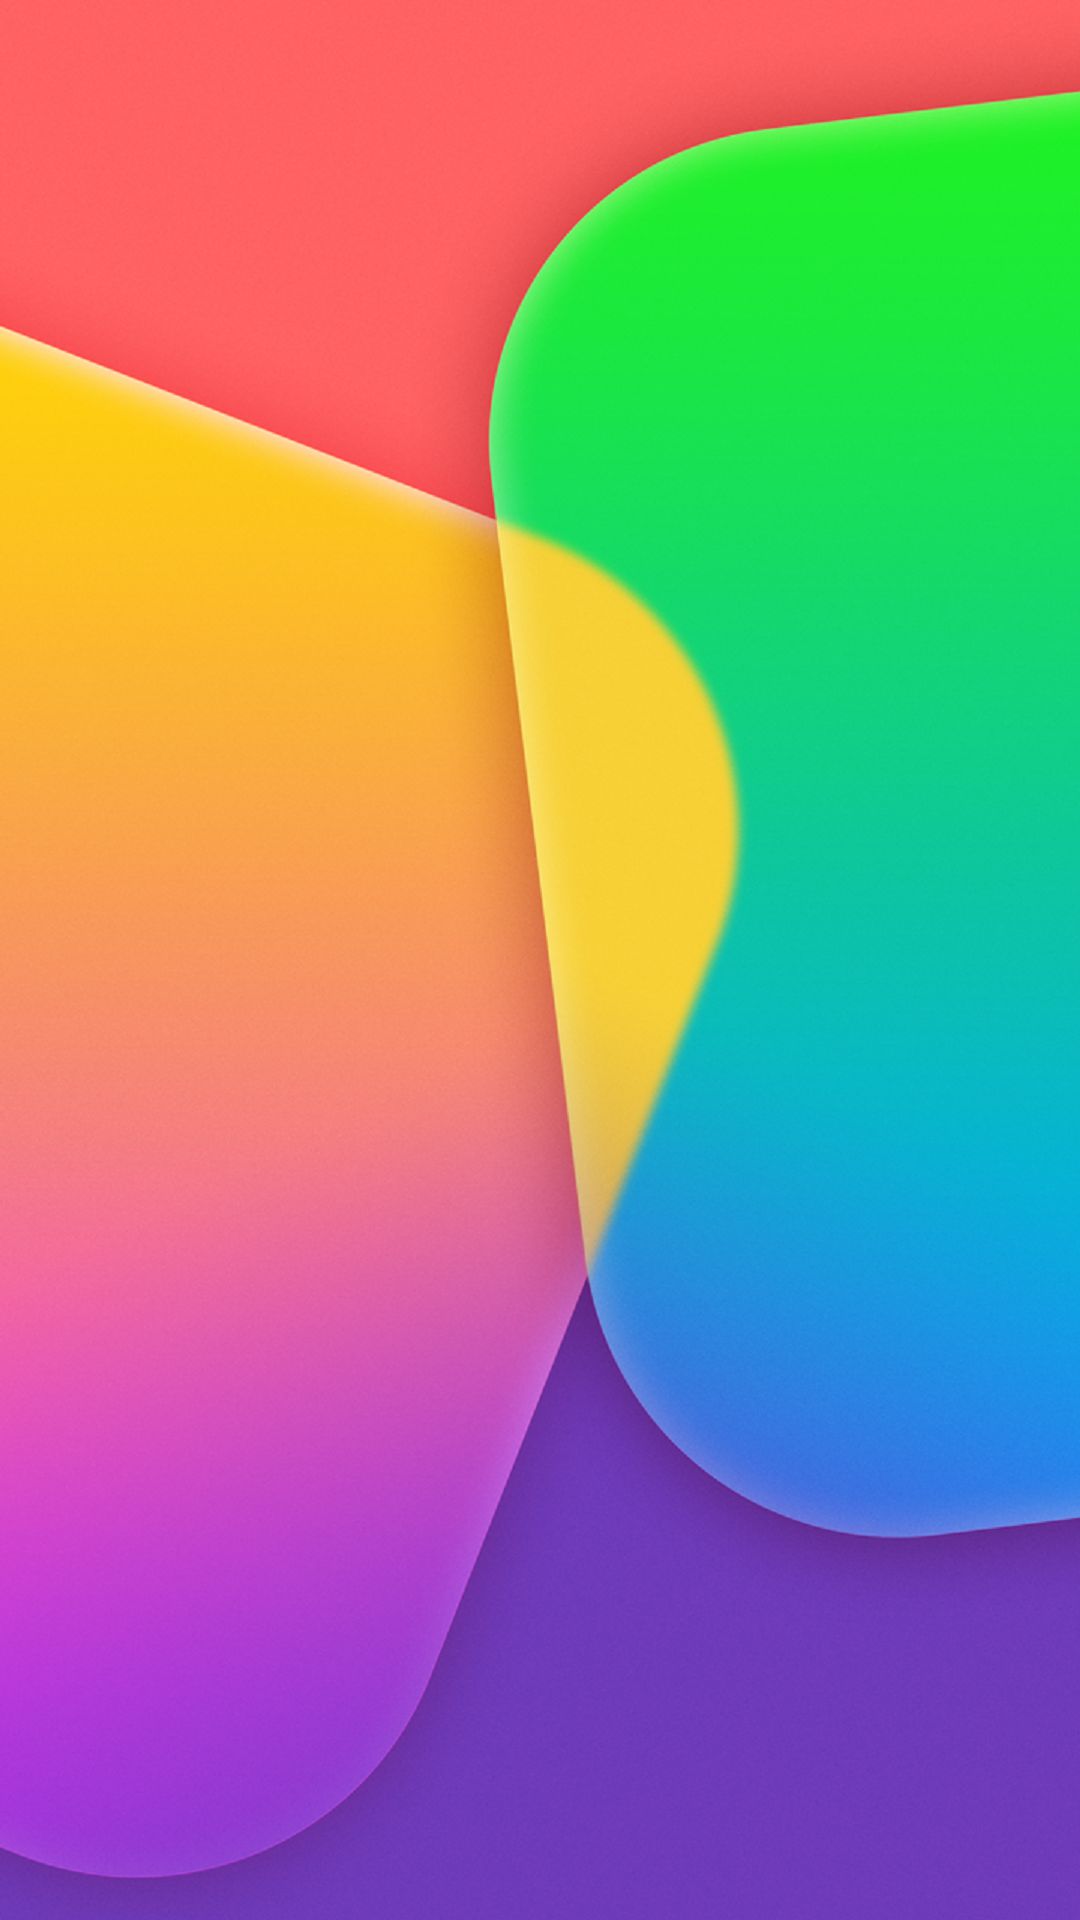 Colorful App Tiles iPhone 6 Wallpaper Download iPhone Wallpapers